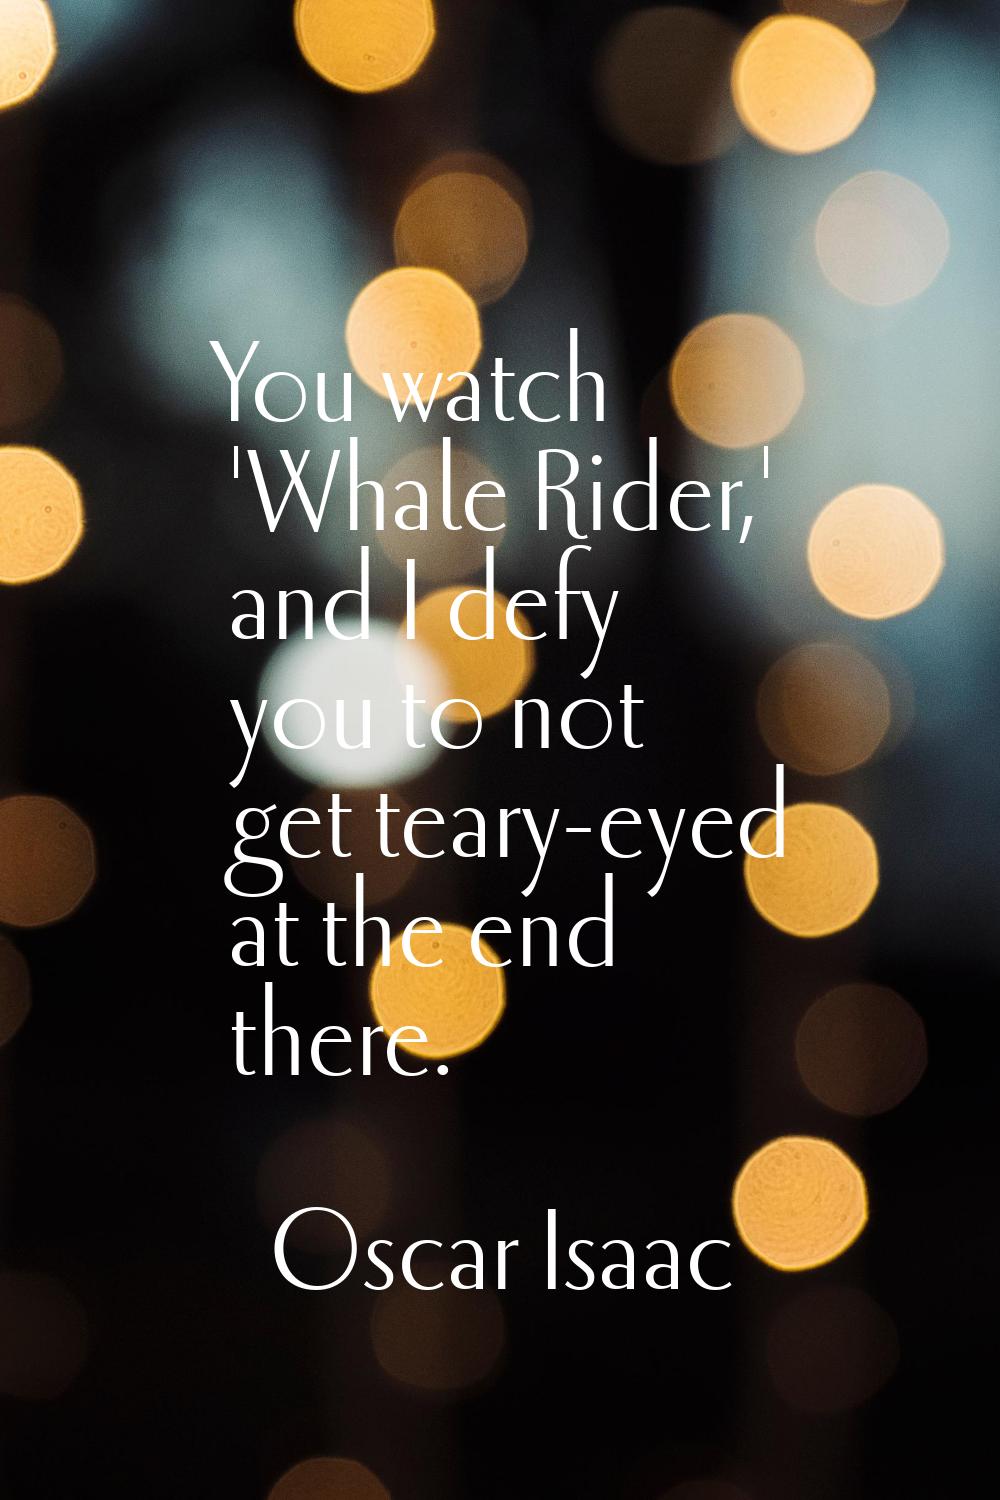 You watch 'Whale Rider,' and I defy you to not get teary-eyed at the end there.